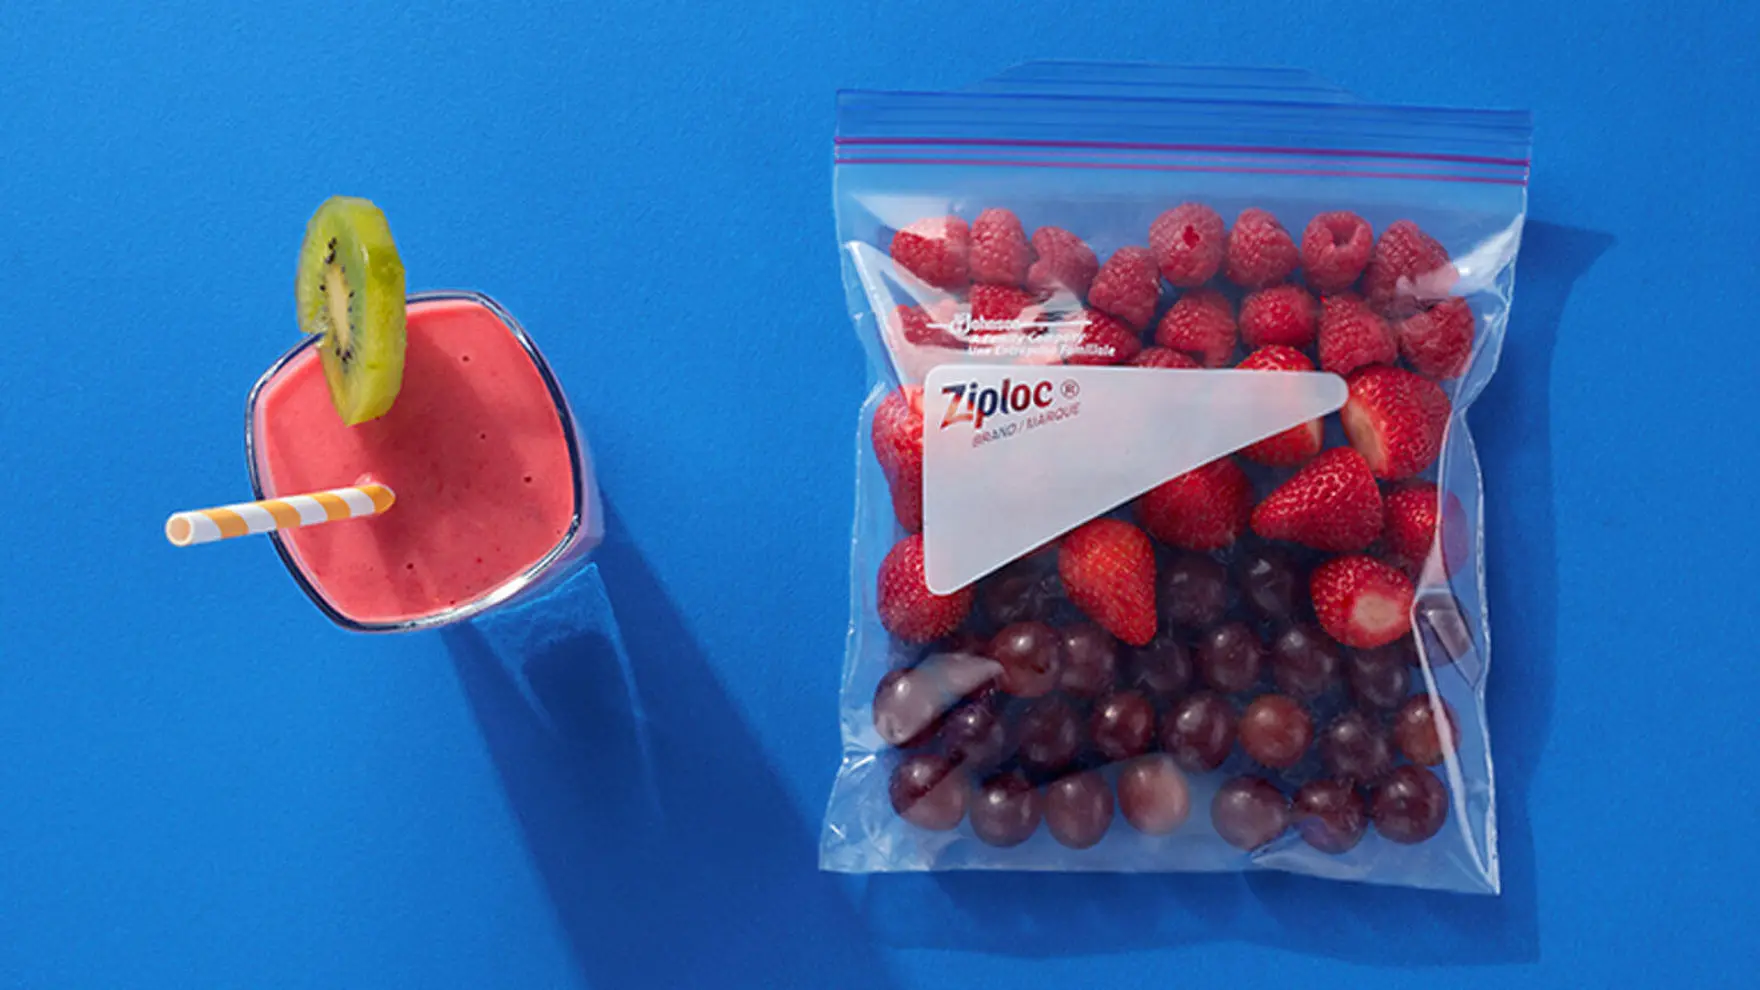 Ziploc bag filled with strawberries, raspberries, and red grapes